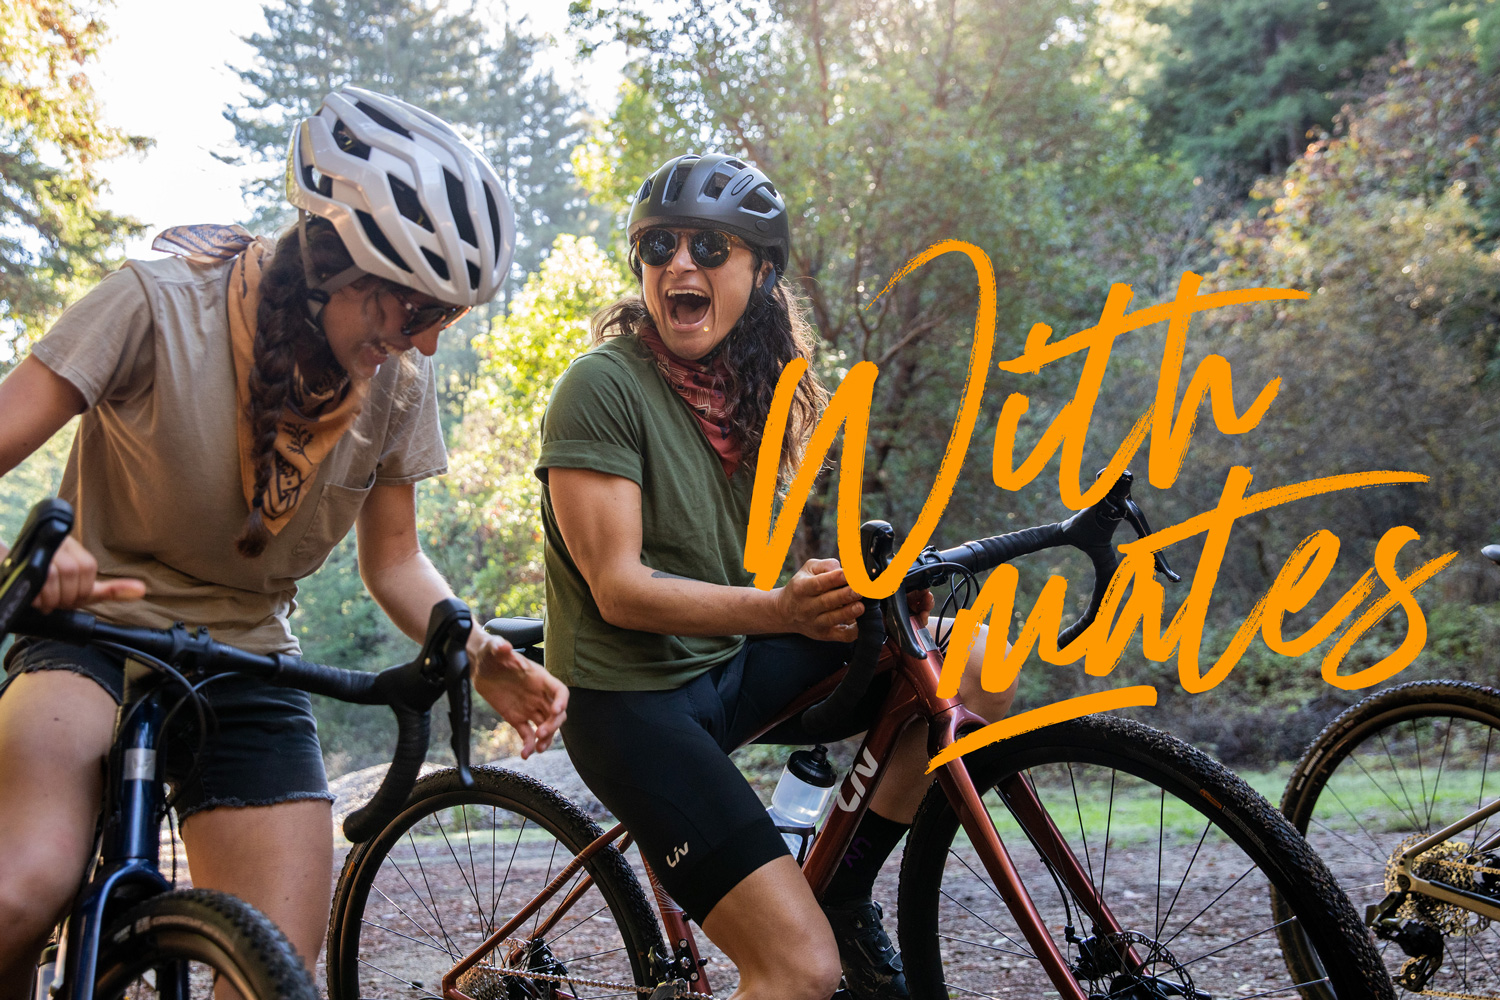 Poster created by WOO Agency for Giant Bikes, showing friends enjoying their Giant Bikes on a dirt trail